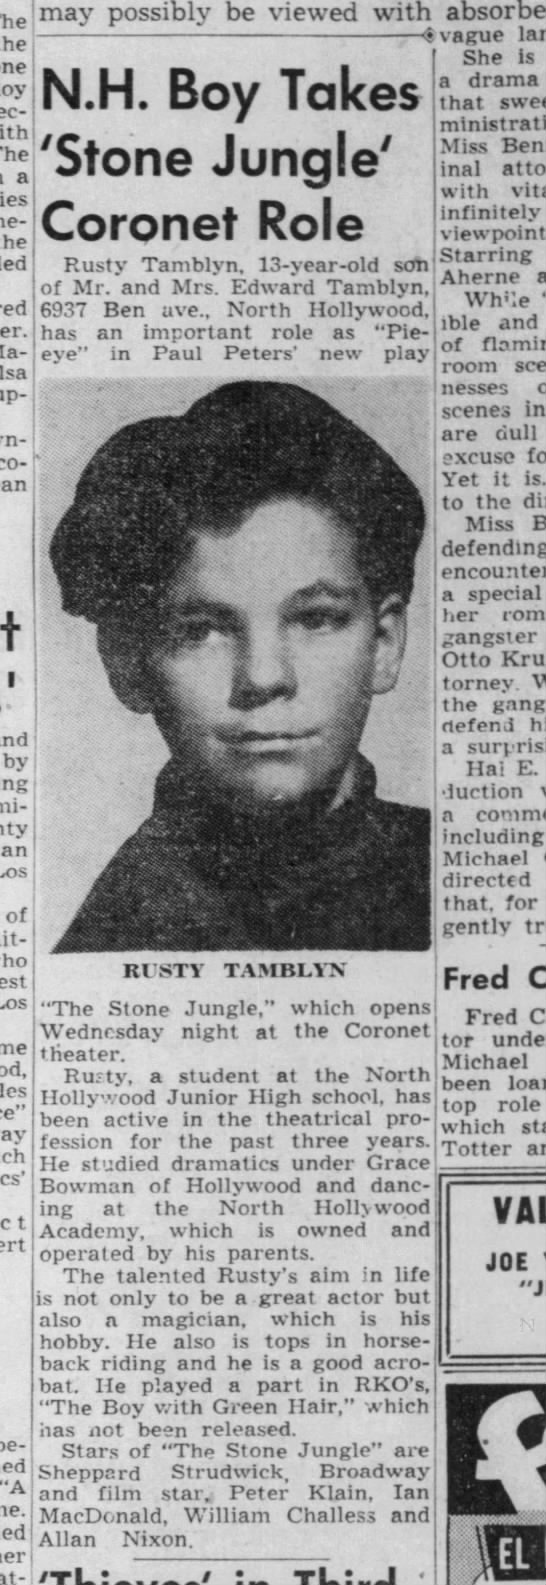 Russ Tamblyn stage role - 